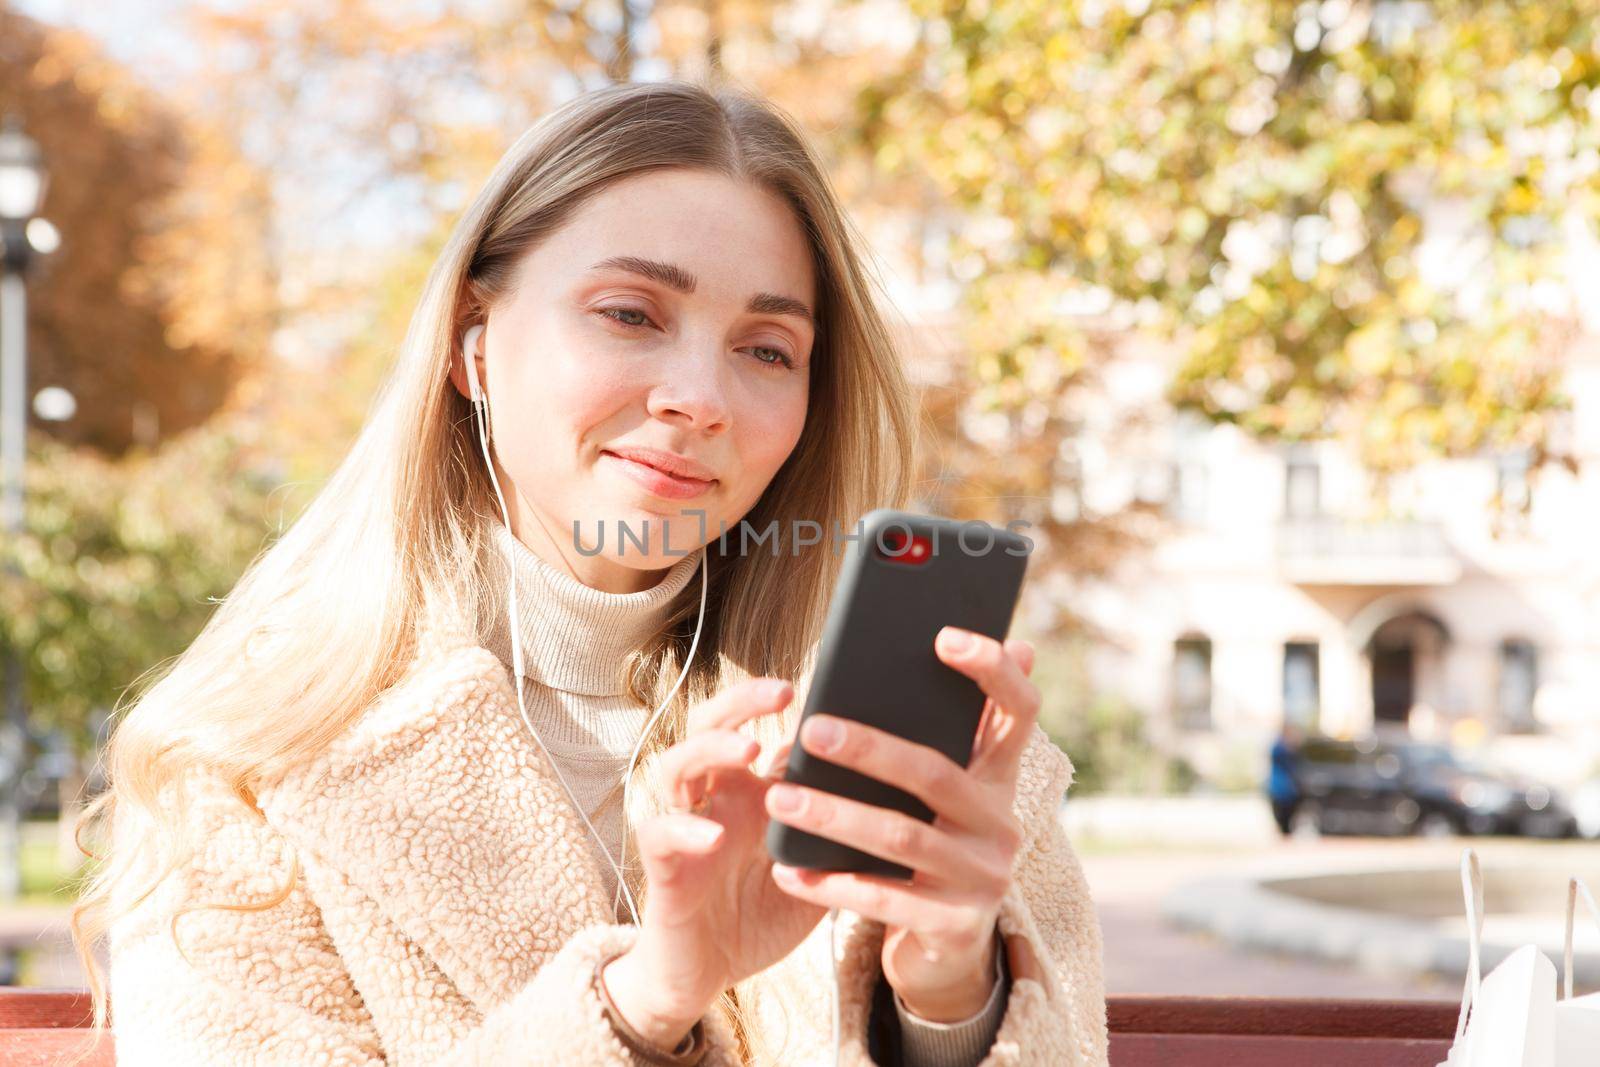 Beautiful woman smiling, using earphones with her smart phone in the park in autumn